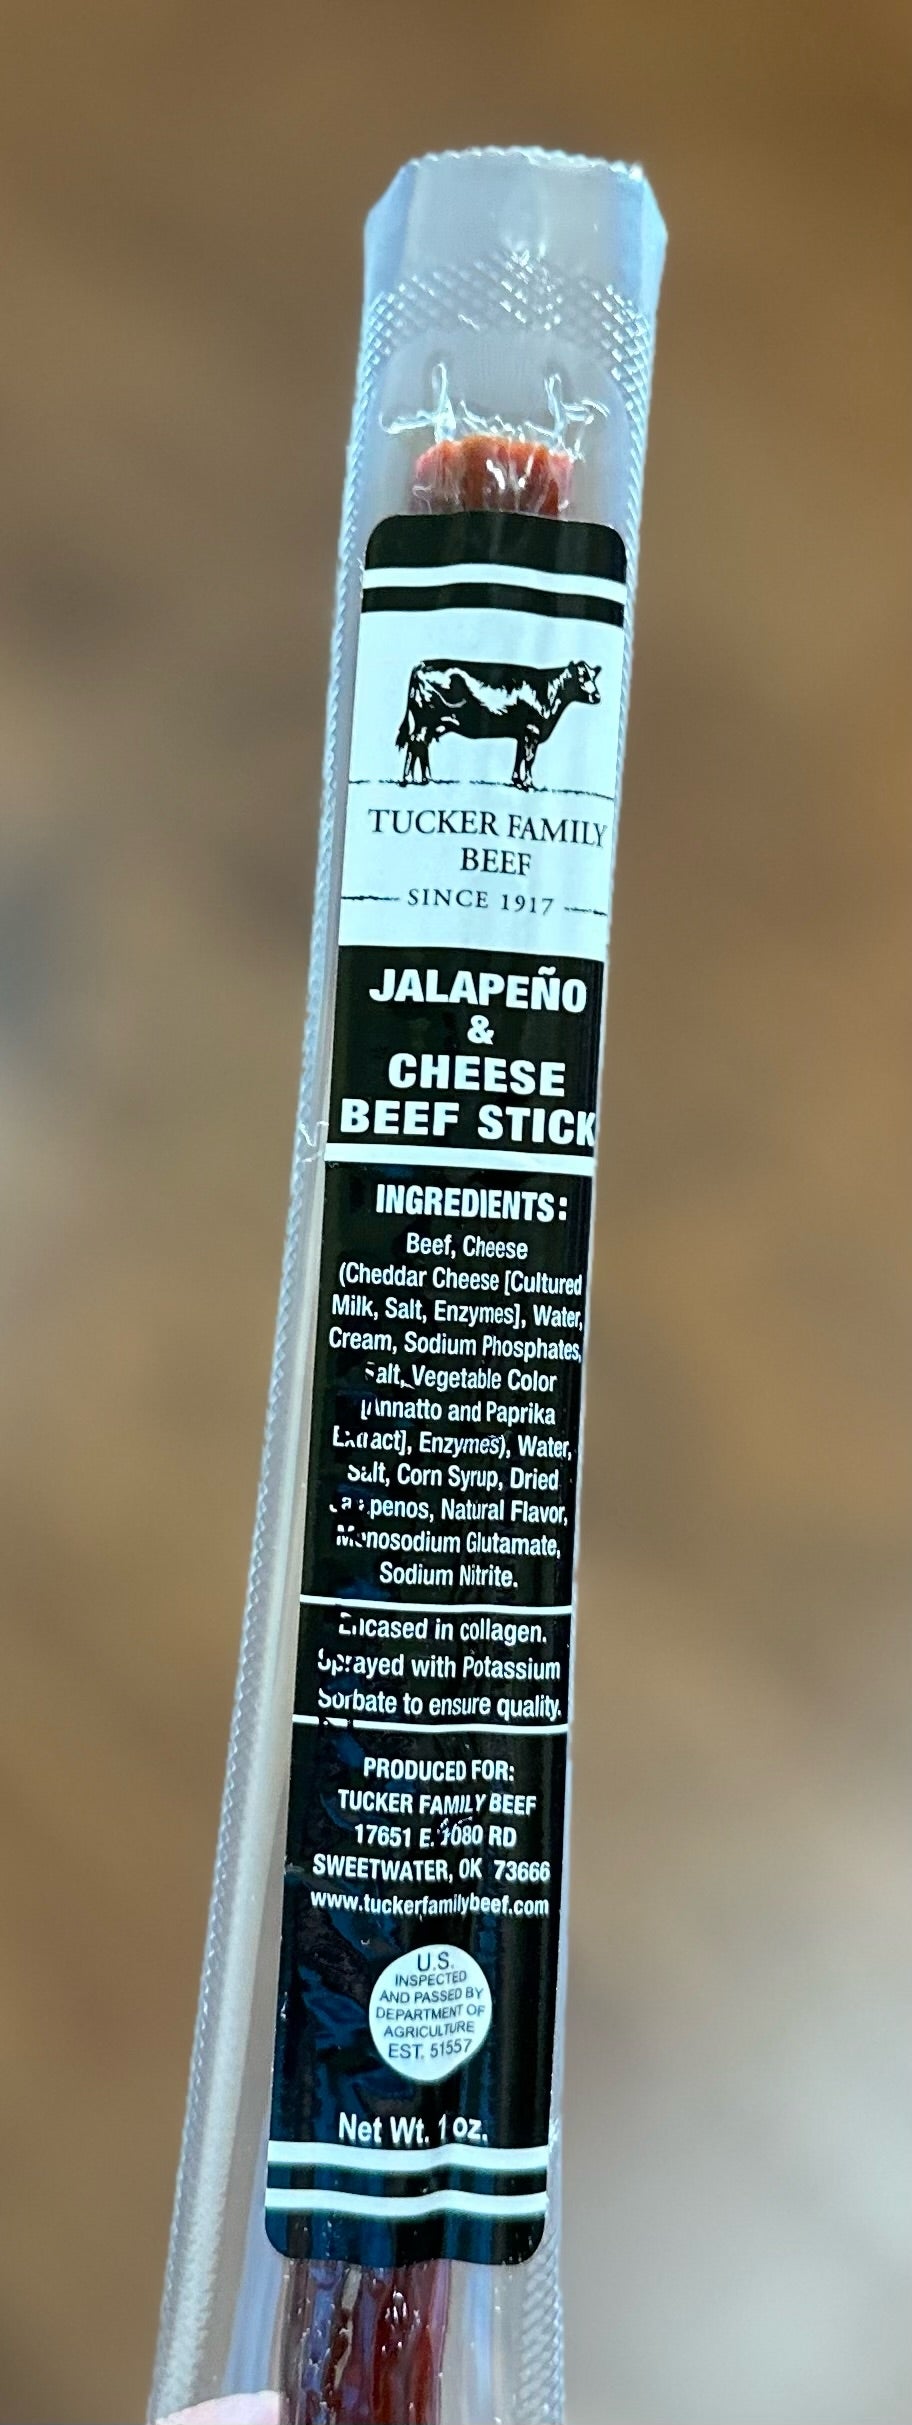 Tucker Family Beef - Jalapeno Cheese Beef Sticks - 100-stick pack